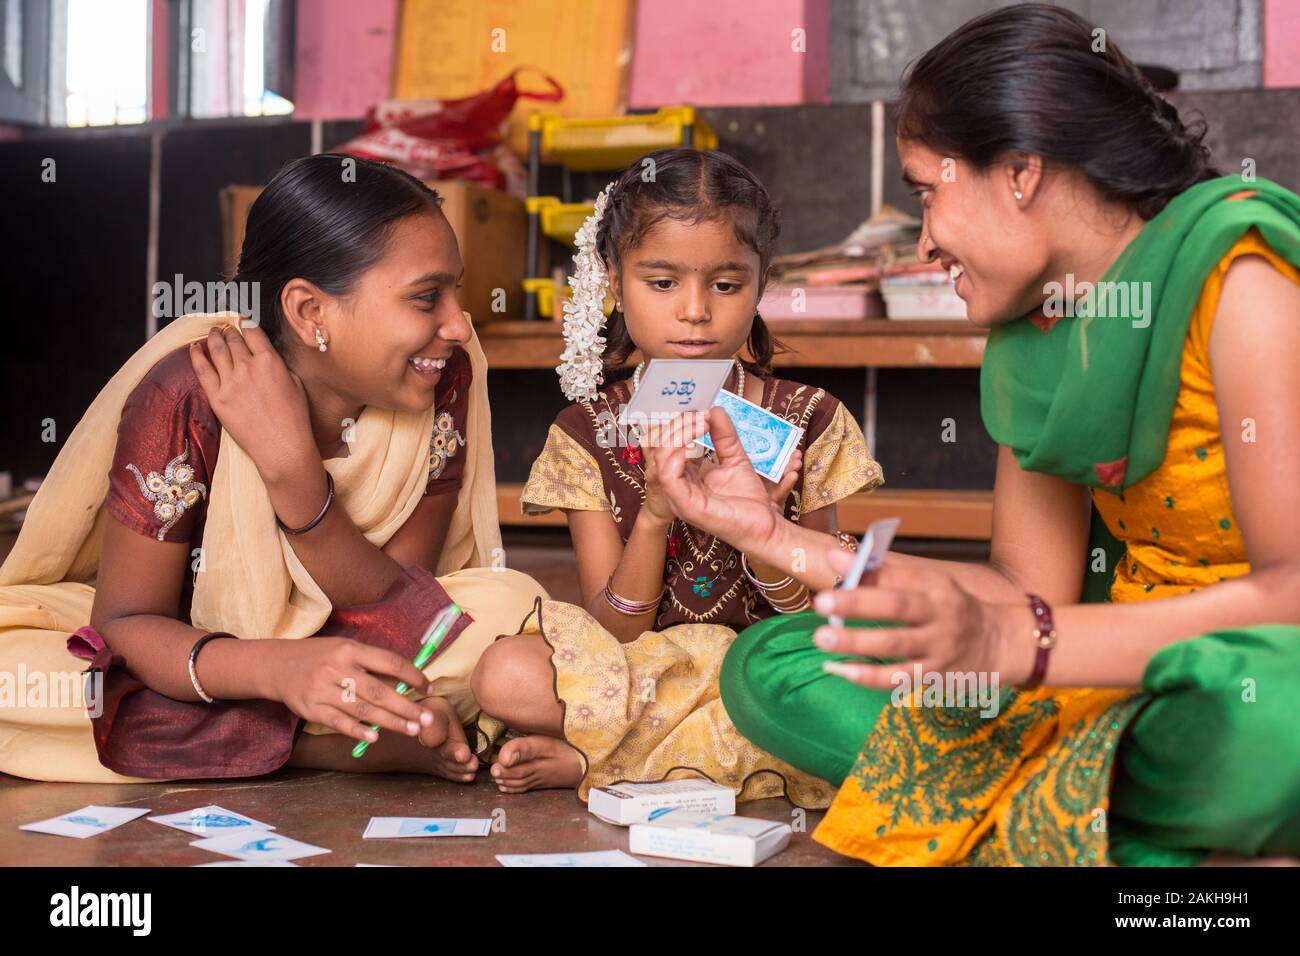 CAPTION: After-School Club (ASC) Coordinator Asha, who herself has scoliosis, leads children in a card game. The game is very visual, designed to be i Stock Photo